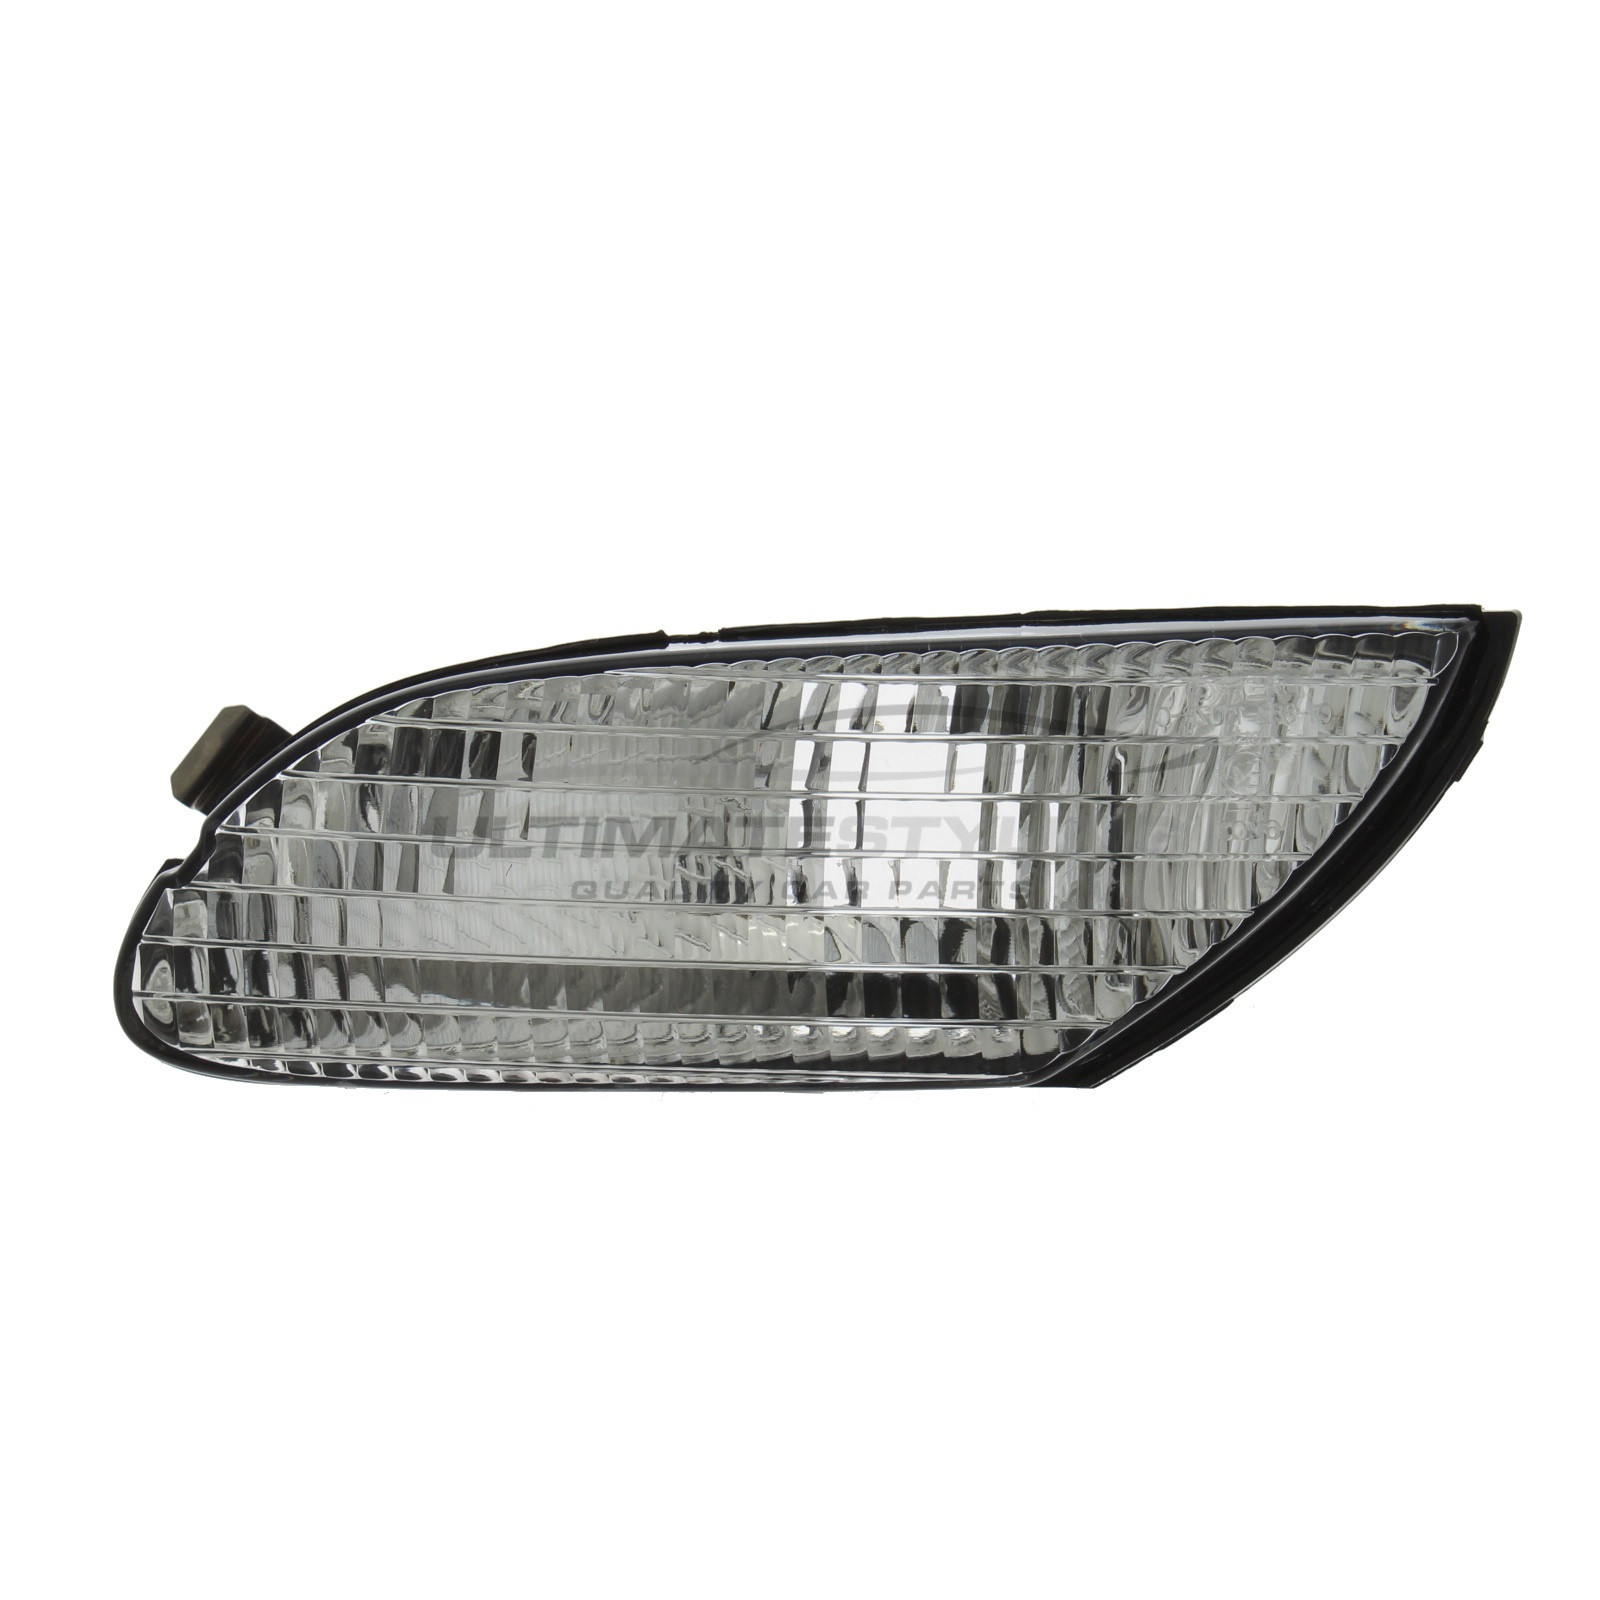 Rover 25 Series 1999-2006 / Rover Commerce 2003-2006 / Rover MG Express 2001-2006 / Rover MGZR 2001-2006 Clear Front Indicator Excludes Bulb Holder - Passenger Side (LH)